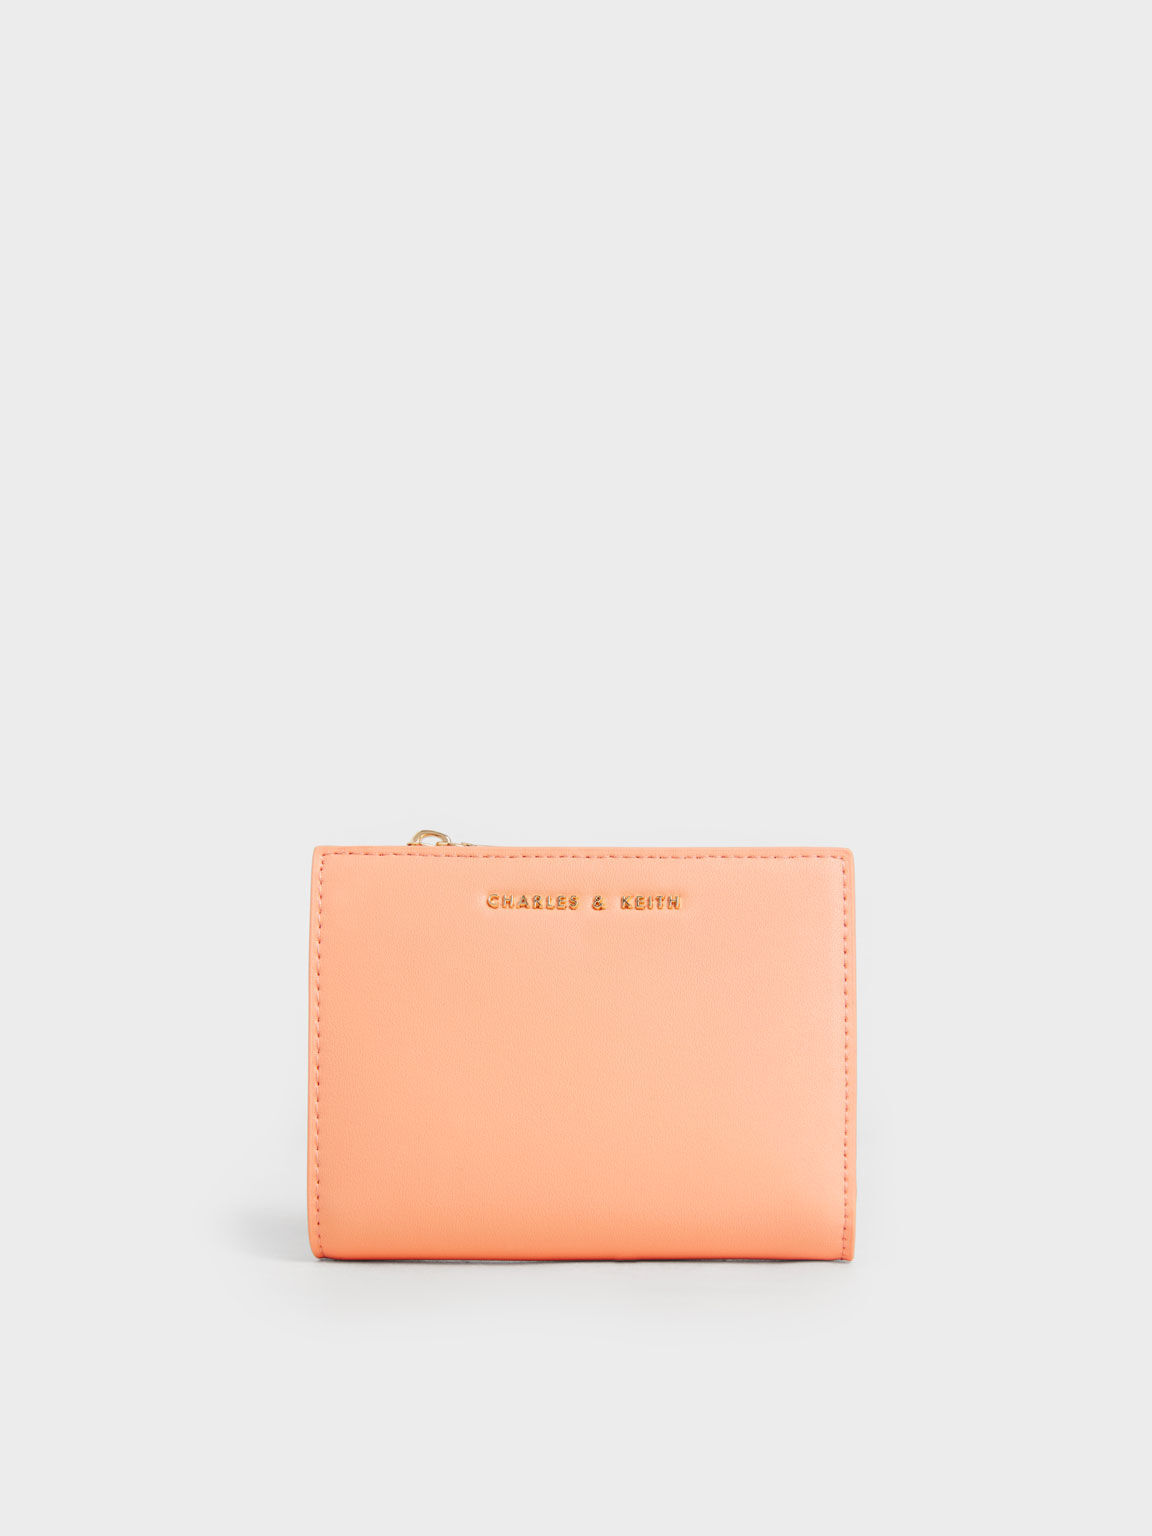 Charles & Keith Leather Wallets for Women